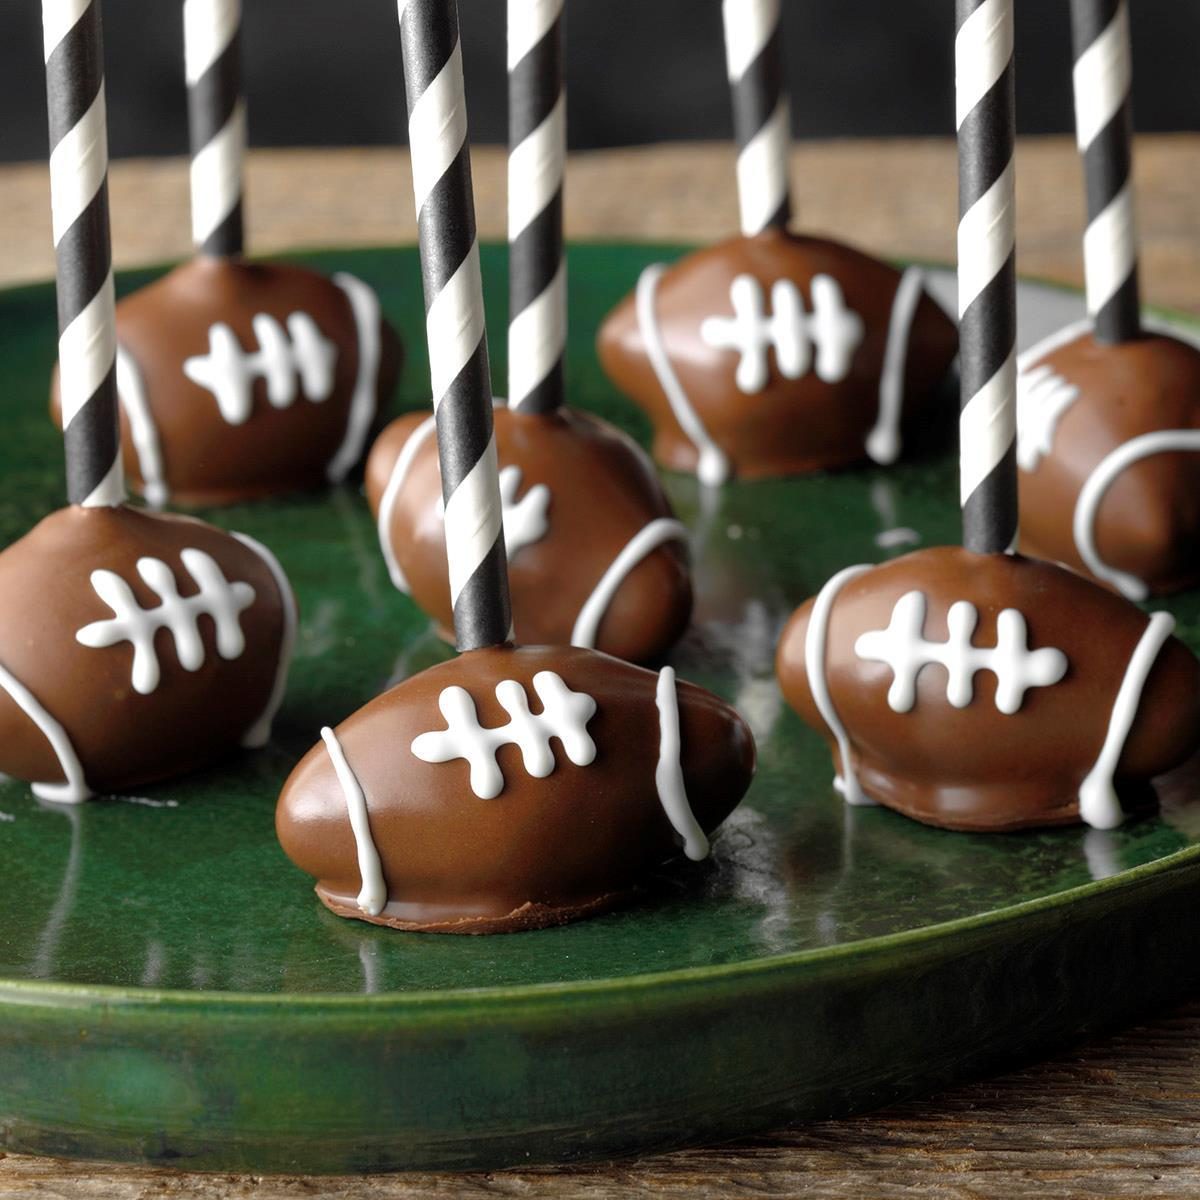 59 Football Foods No One Can Resist on Game Day